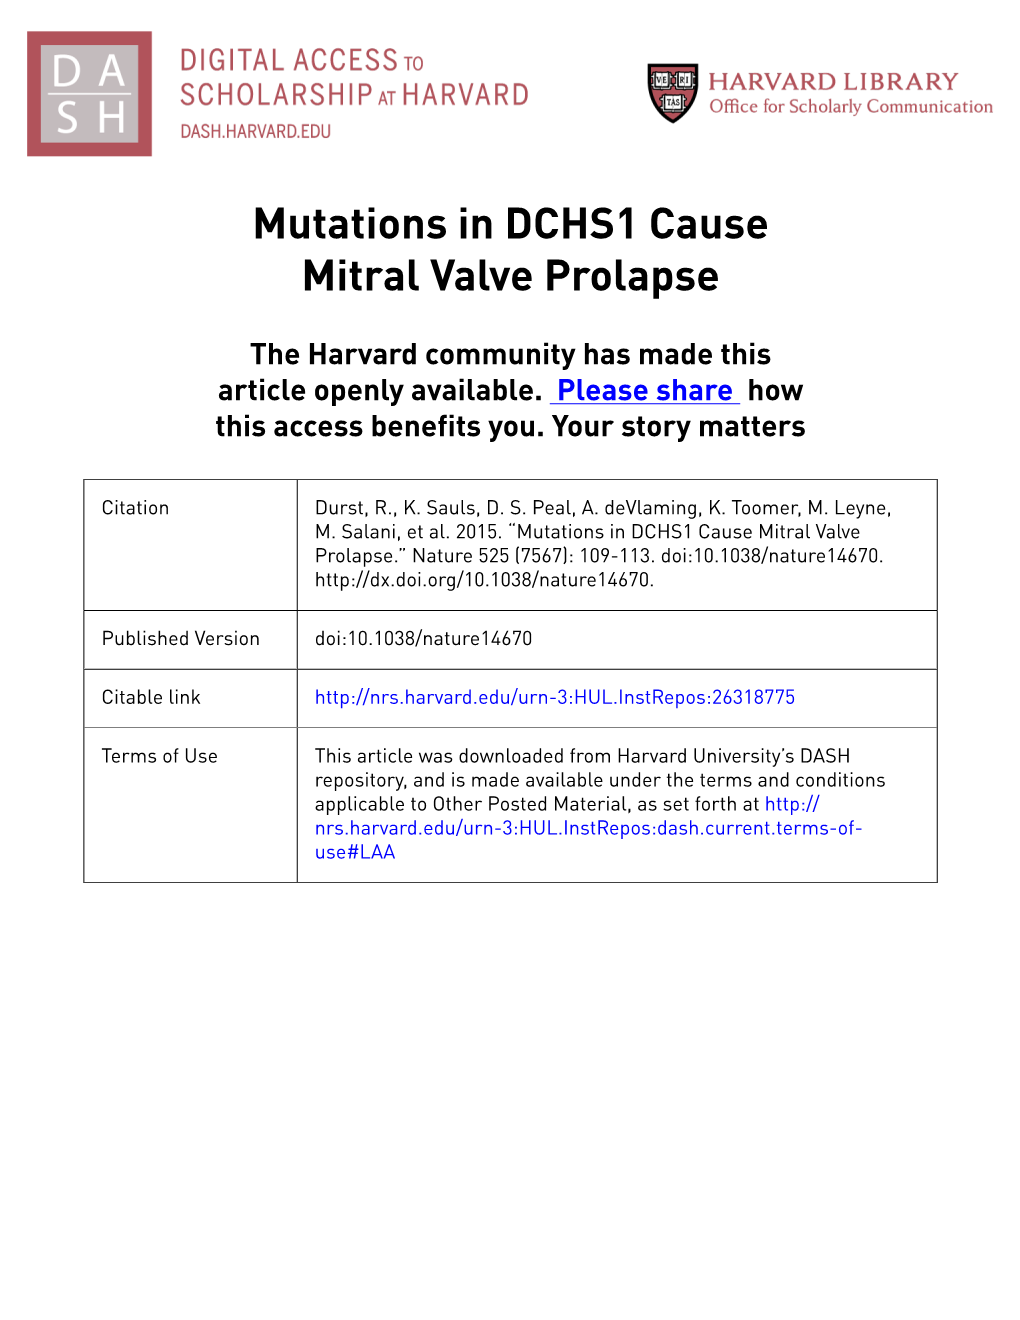 Mutations in DCHS1 Cause Mitral Valve Prolapse